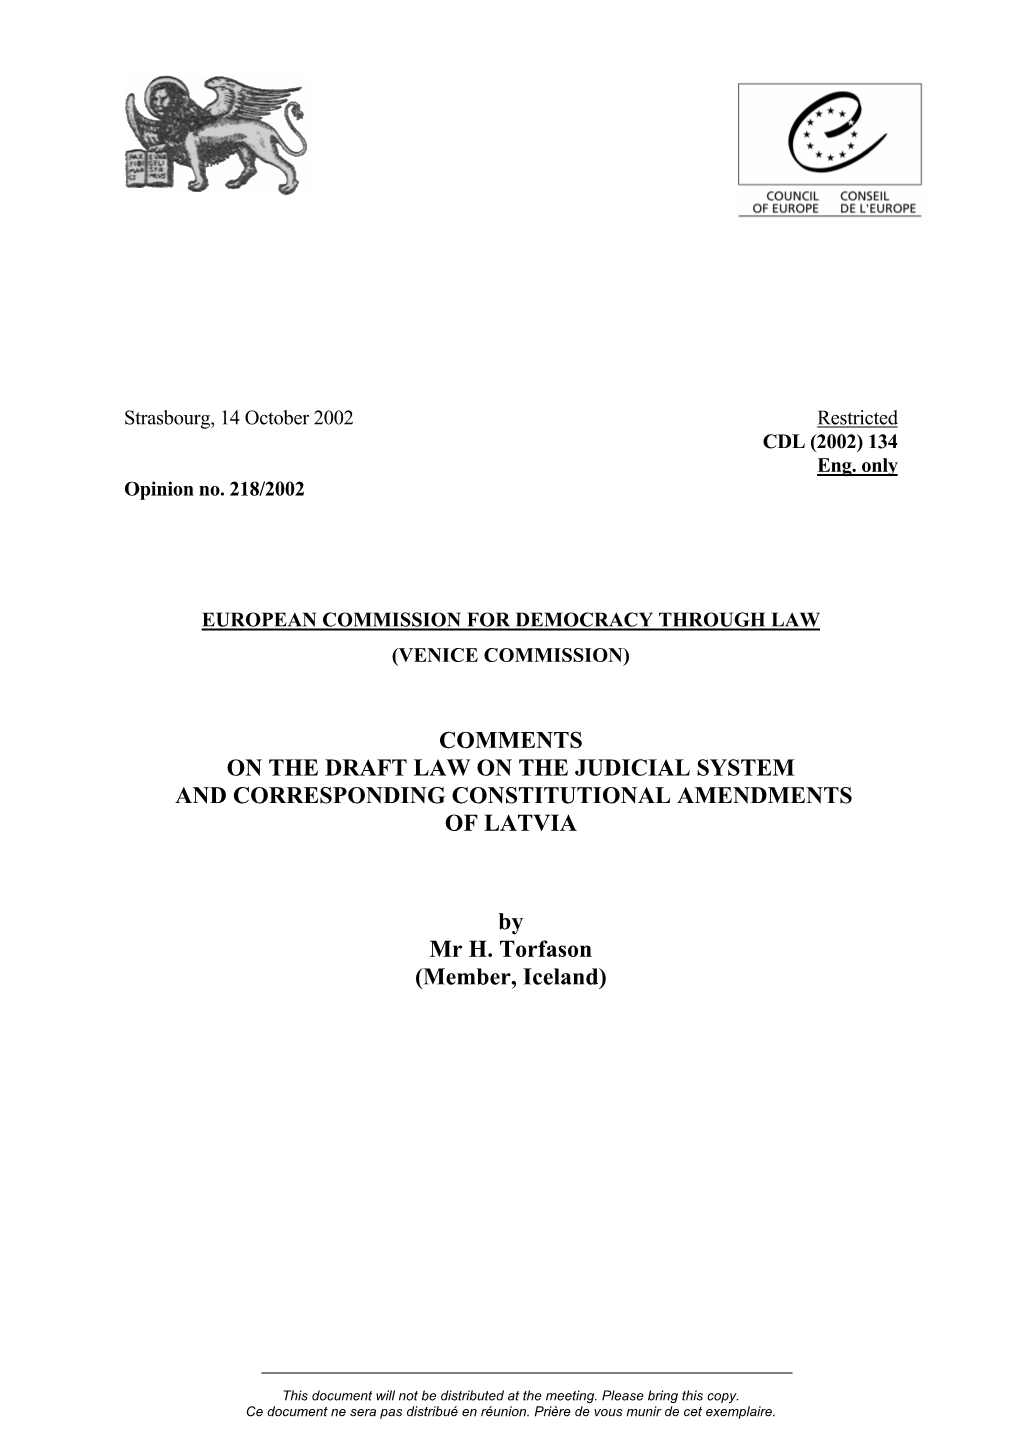 COMMENTS on the DRAFT LAW on the JUDICIAL SYSTEM and CORRESPONDING CONSTITUTIONAL AMENDMENTS of LATVIA by Mr H. Torfason